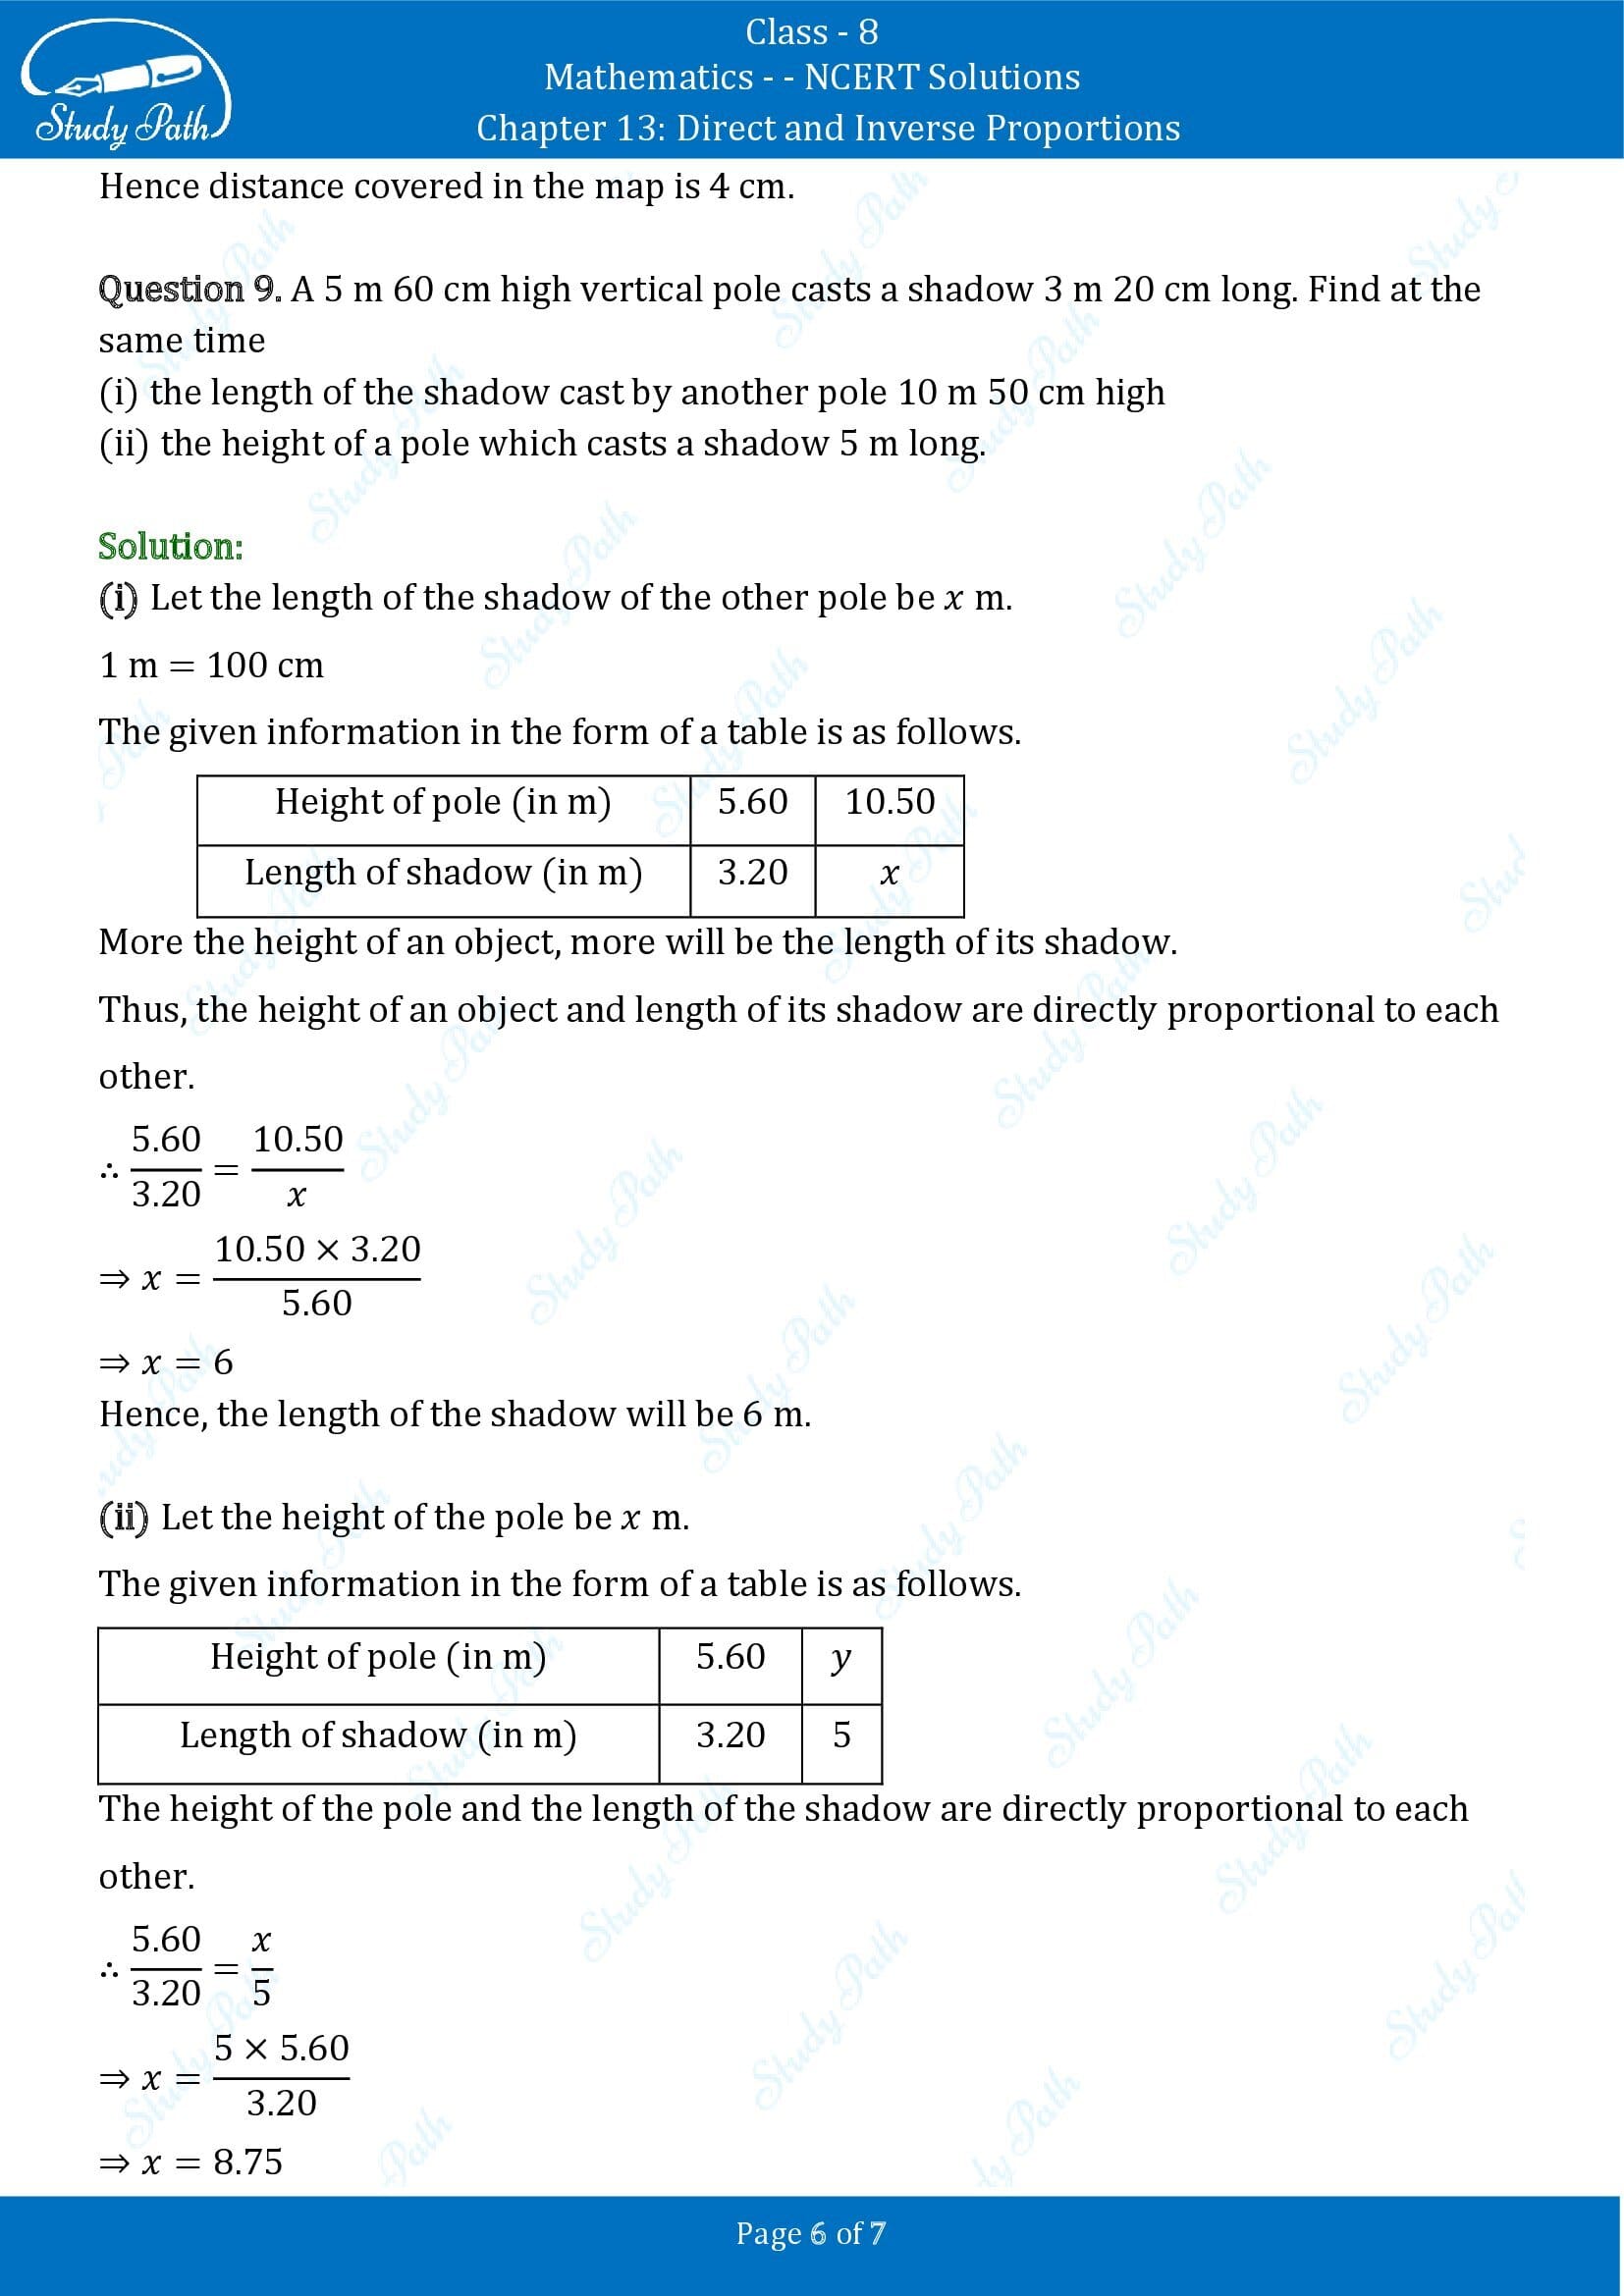 NCERT Solutions for Class 8 Maths Chapter 13 Direct and Inverse Proportions Exercise 13.1 00006